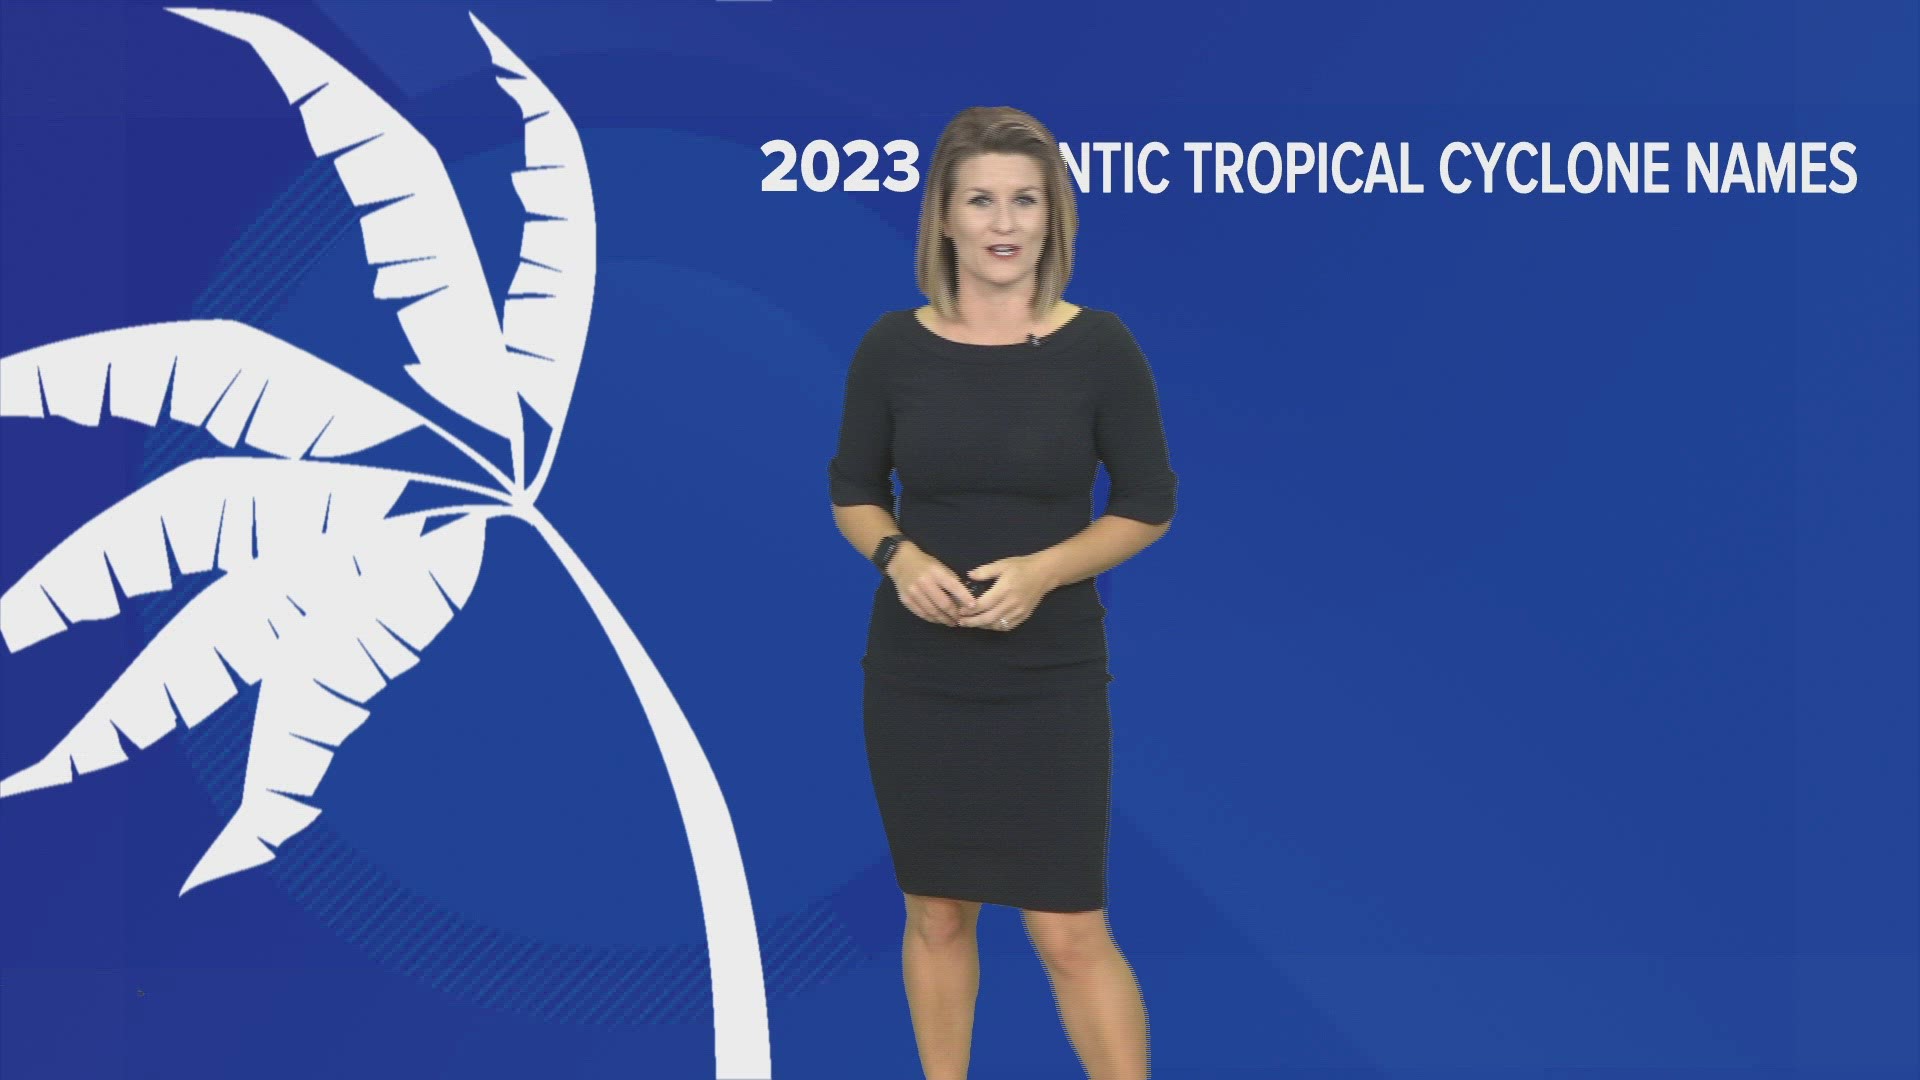 Meteorologist Lauren Rautenkranz says there is still Saharan dust out there, but the plumes are not as active or dense as normal.